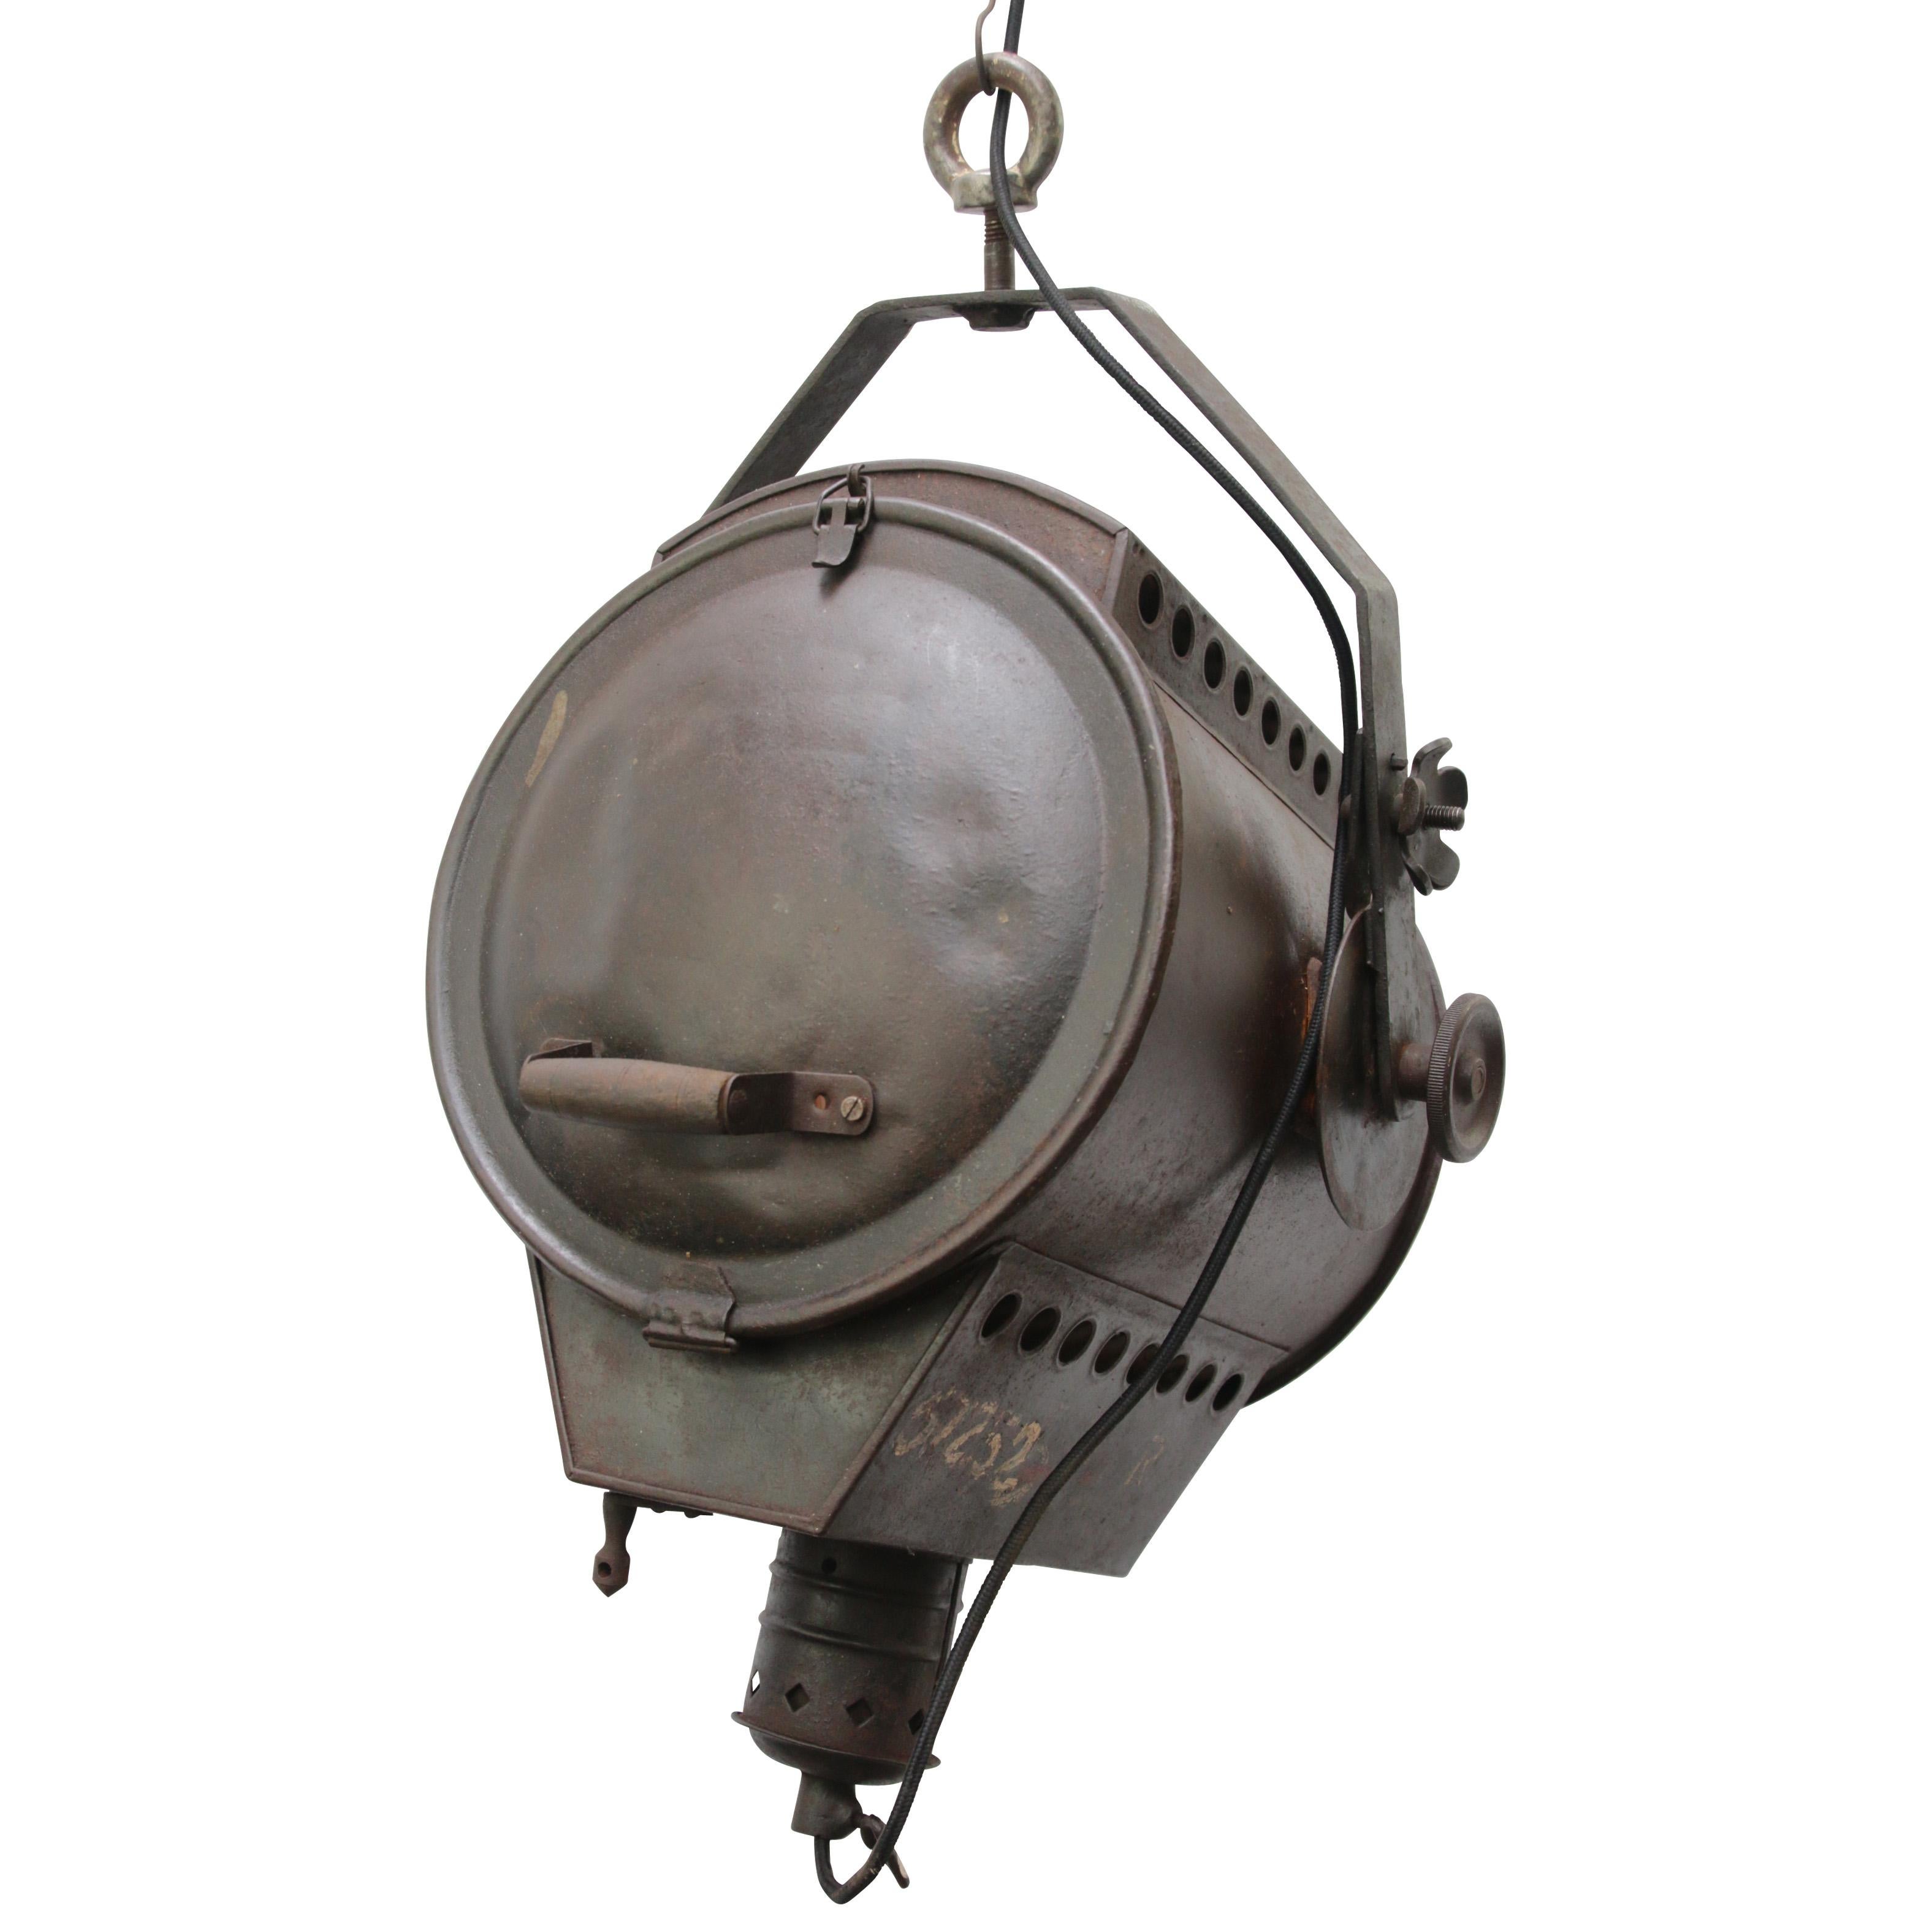 Glass Rust Metal Vintage Industrial Theater Pendant Spot Light For Sale